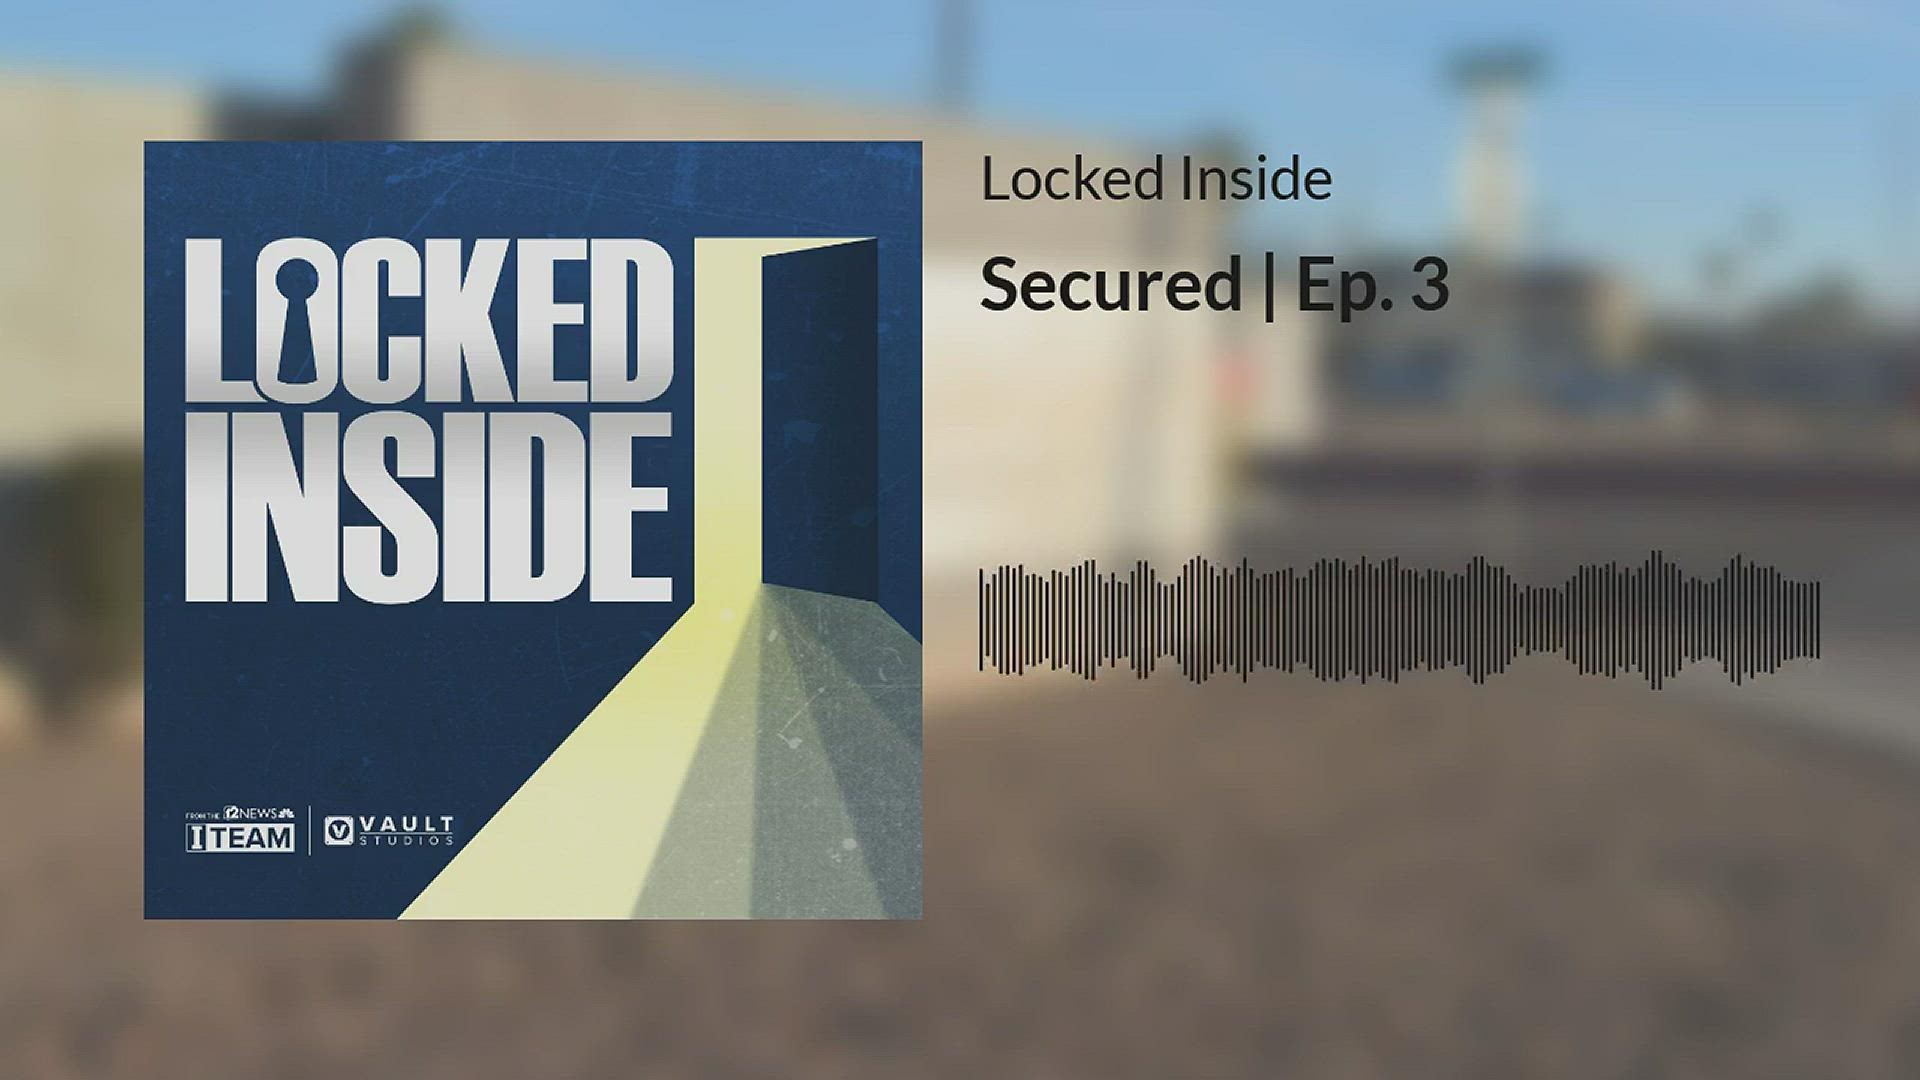 In episode 3 of the Locked Inside podcast, we take a closer look at the Arizona State Hospital and its role in treating Christopher Lambeth.